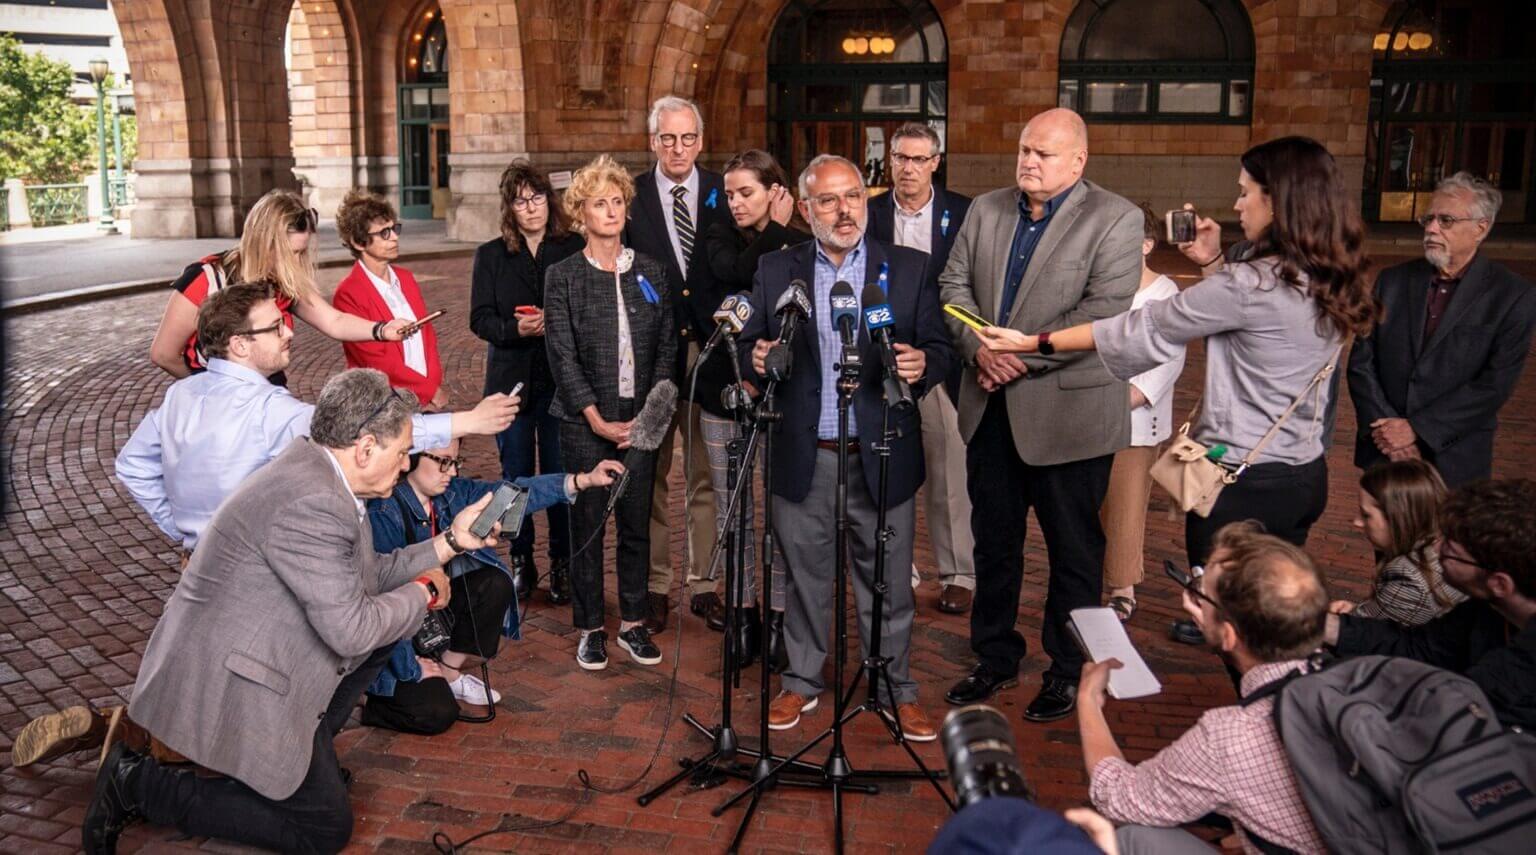 Pittsburgh Jewish Federation CEO Jeff Finkelstein speaks to the press after a jury find the gunman who shot 11 Jewish worshipers guilty of federal crimes. The writer kneels at lower left, in Pittsburgh, June 16, 2023.